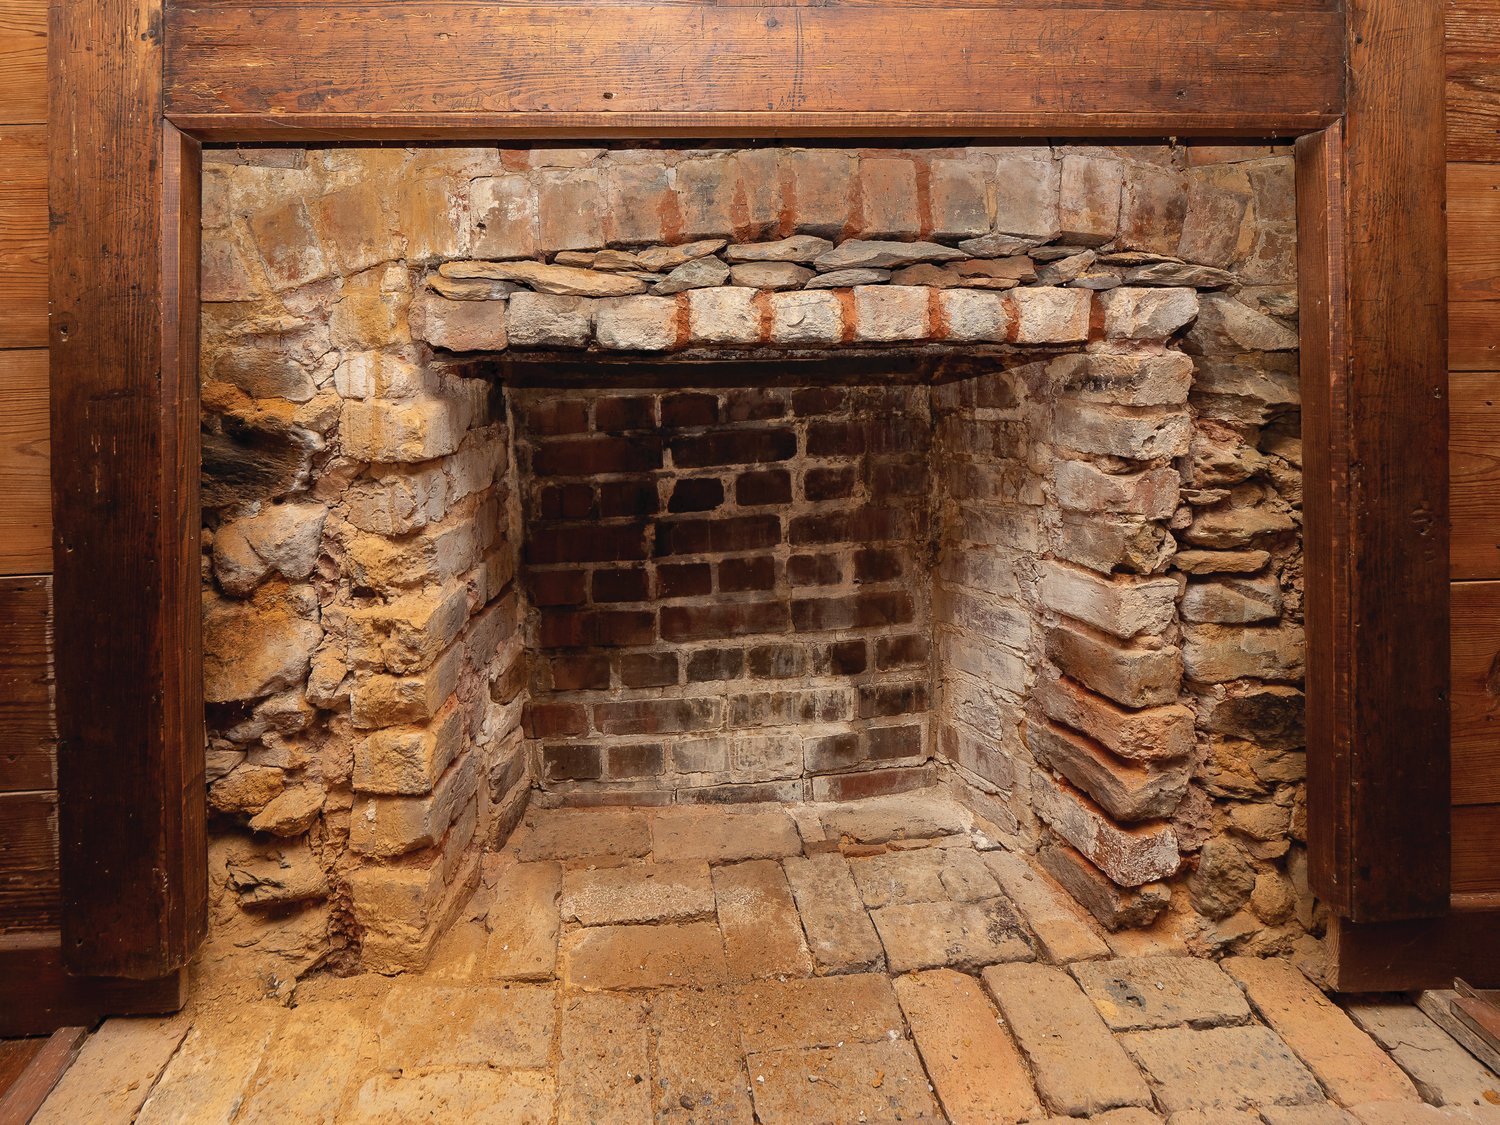 Lewis Freeman's one-room home in Pittsboro was added onto over the years. The orginal fireplace still exists.